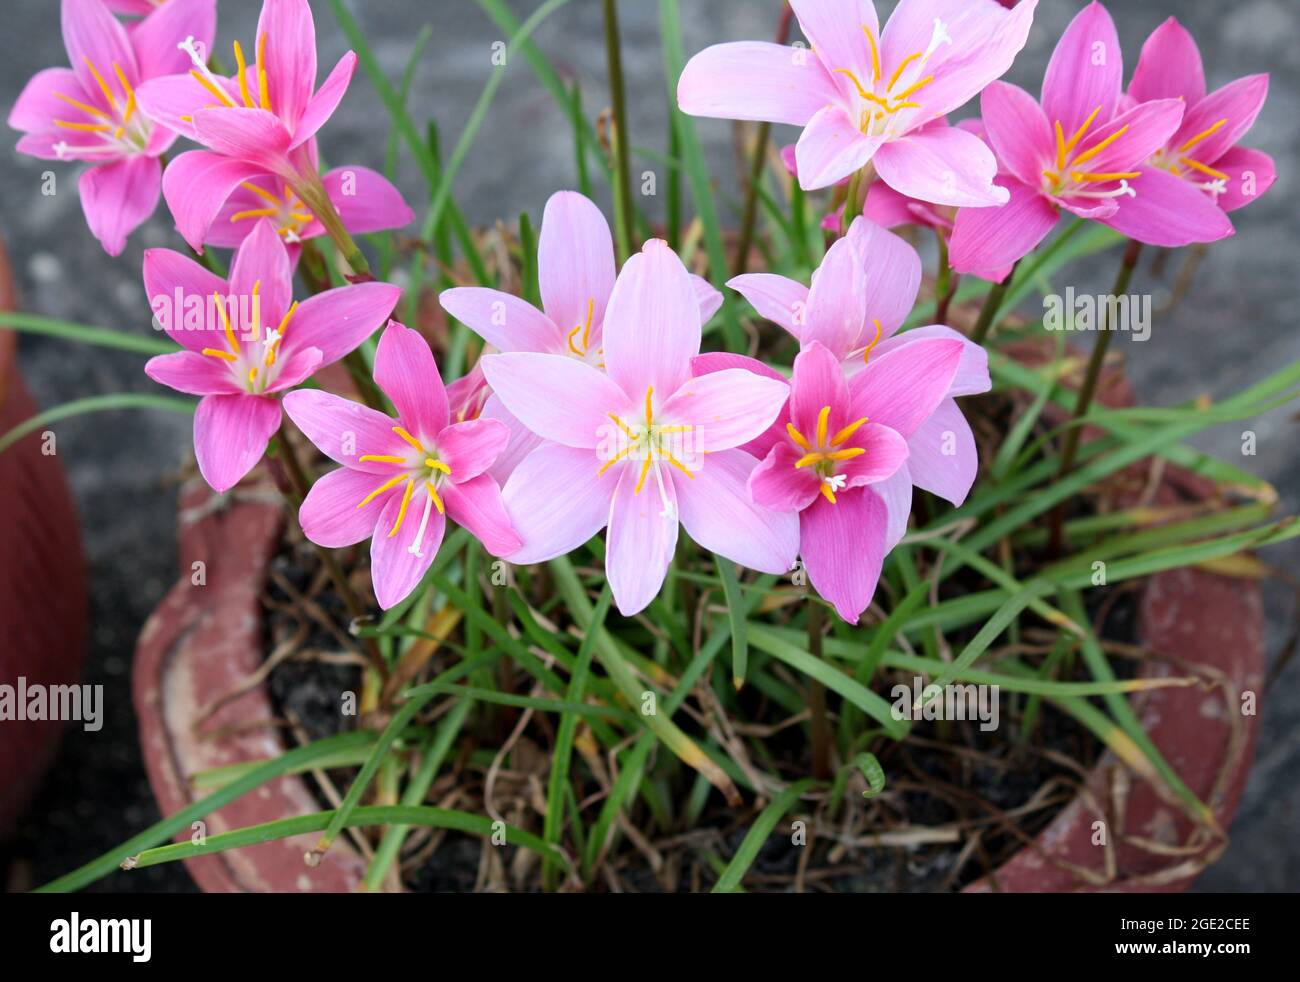 Pink rain lilies - both species (Zephyranthes rosea) light pink and (Zephyranthes carinata) dark pink can be seen here Stock Photo